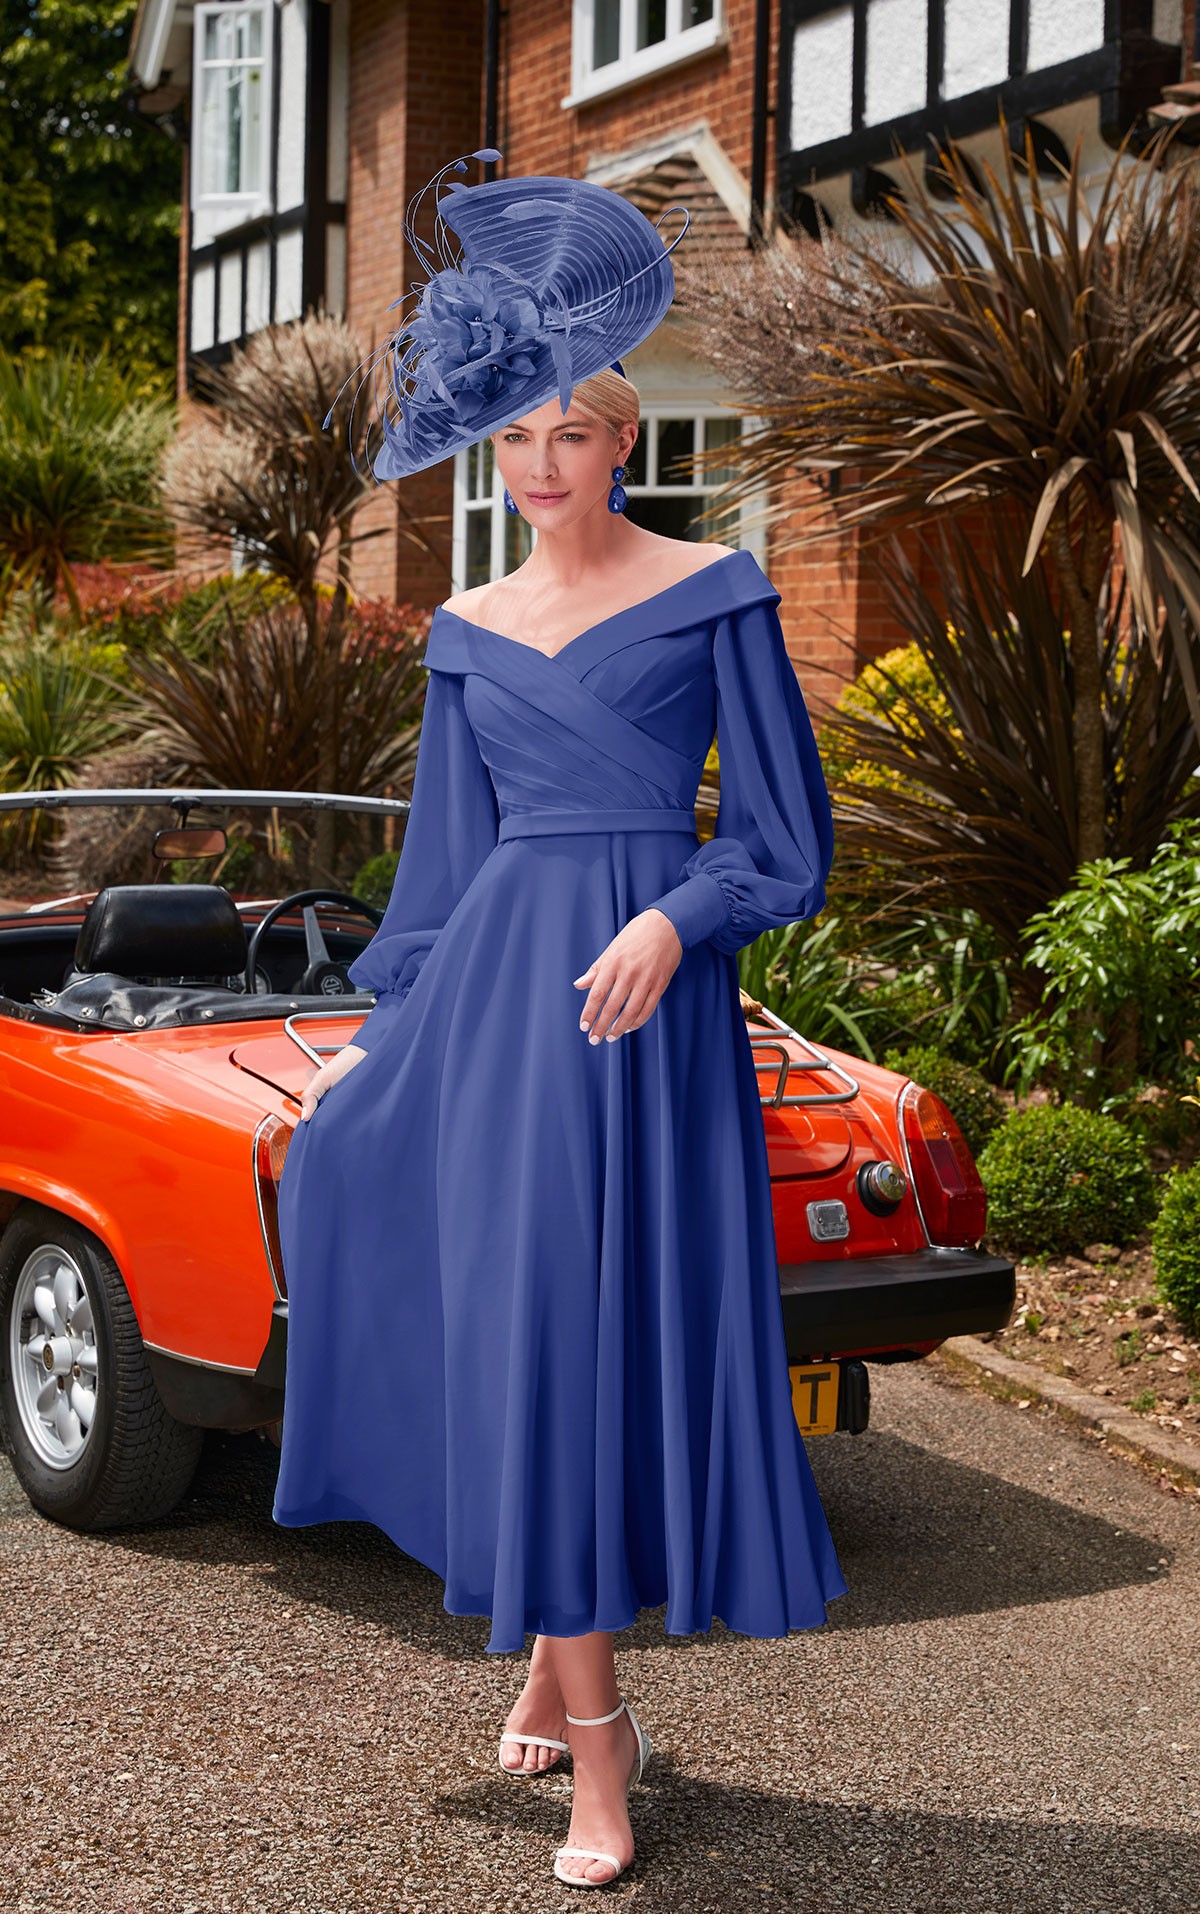 Veni Infantino 29677 - size 22 - Veni Infantino 29677 - Royal Blue Chiffon dress with Off the shoulder neckline & sleeves Mother of the Bride & groom dresses Now on Sale at Occasions at Blessings Loyal Parade, Mill Rise, Westdene, Brighton. BN1 5GG T: 01273 505766 E: info@blessingsbridal.co.uk